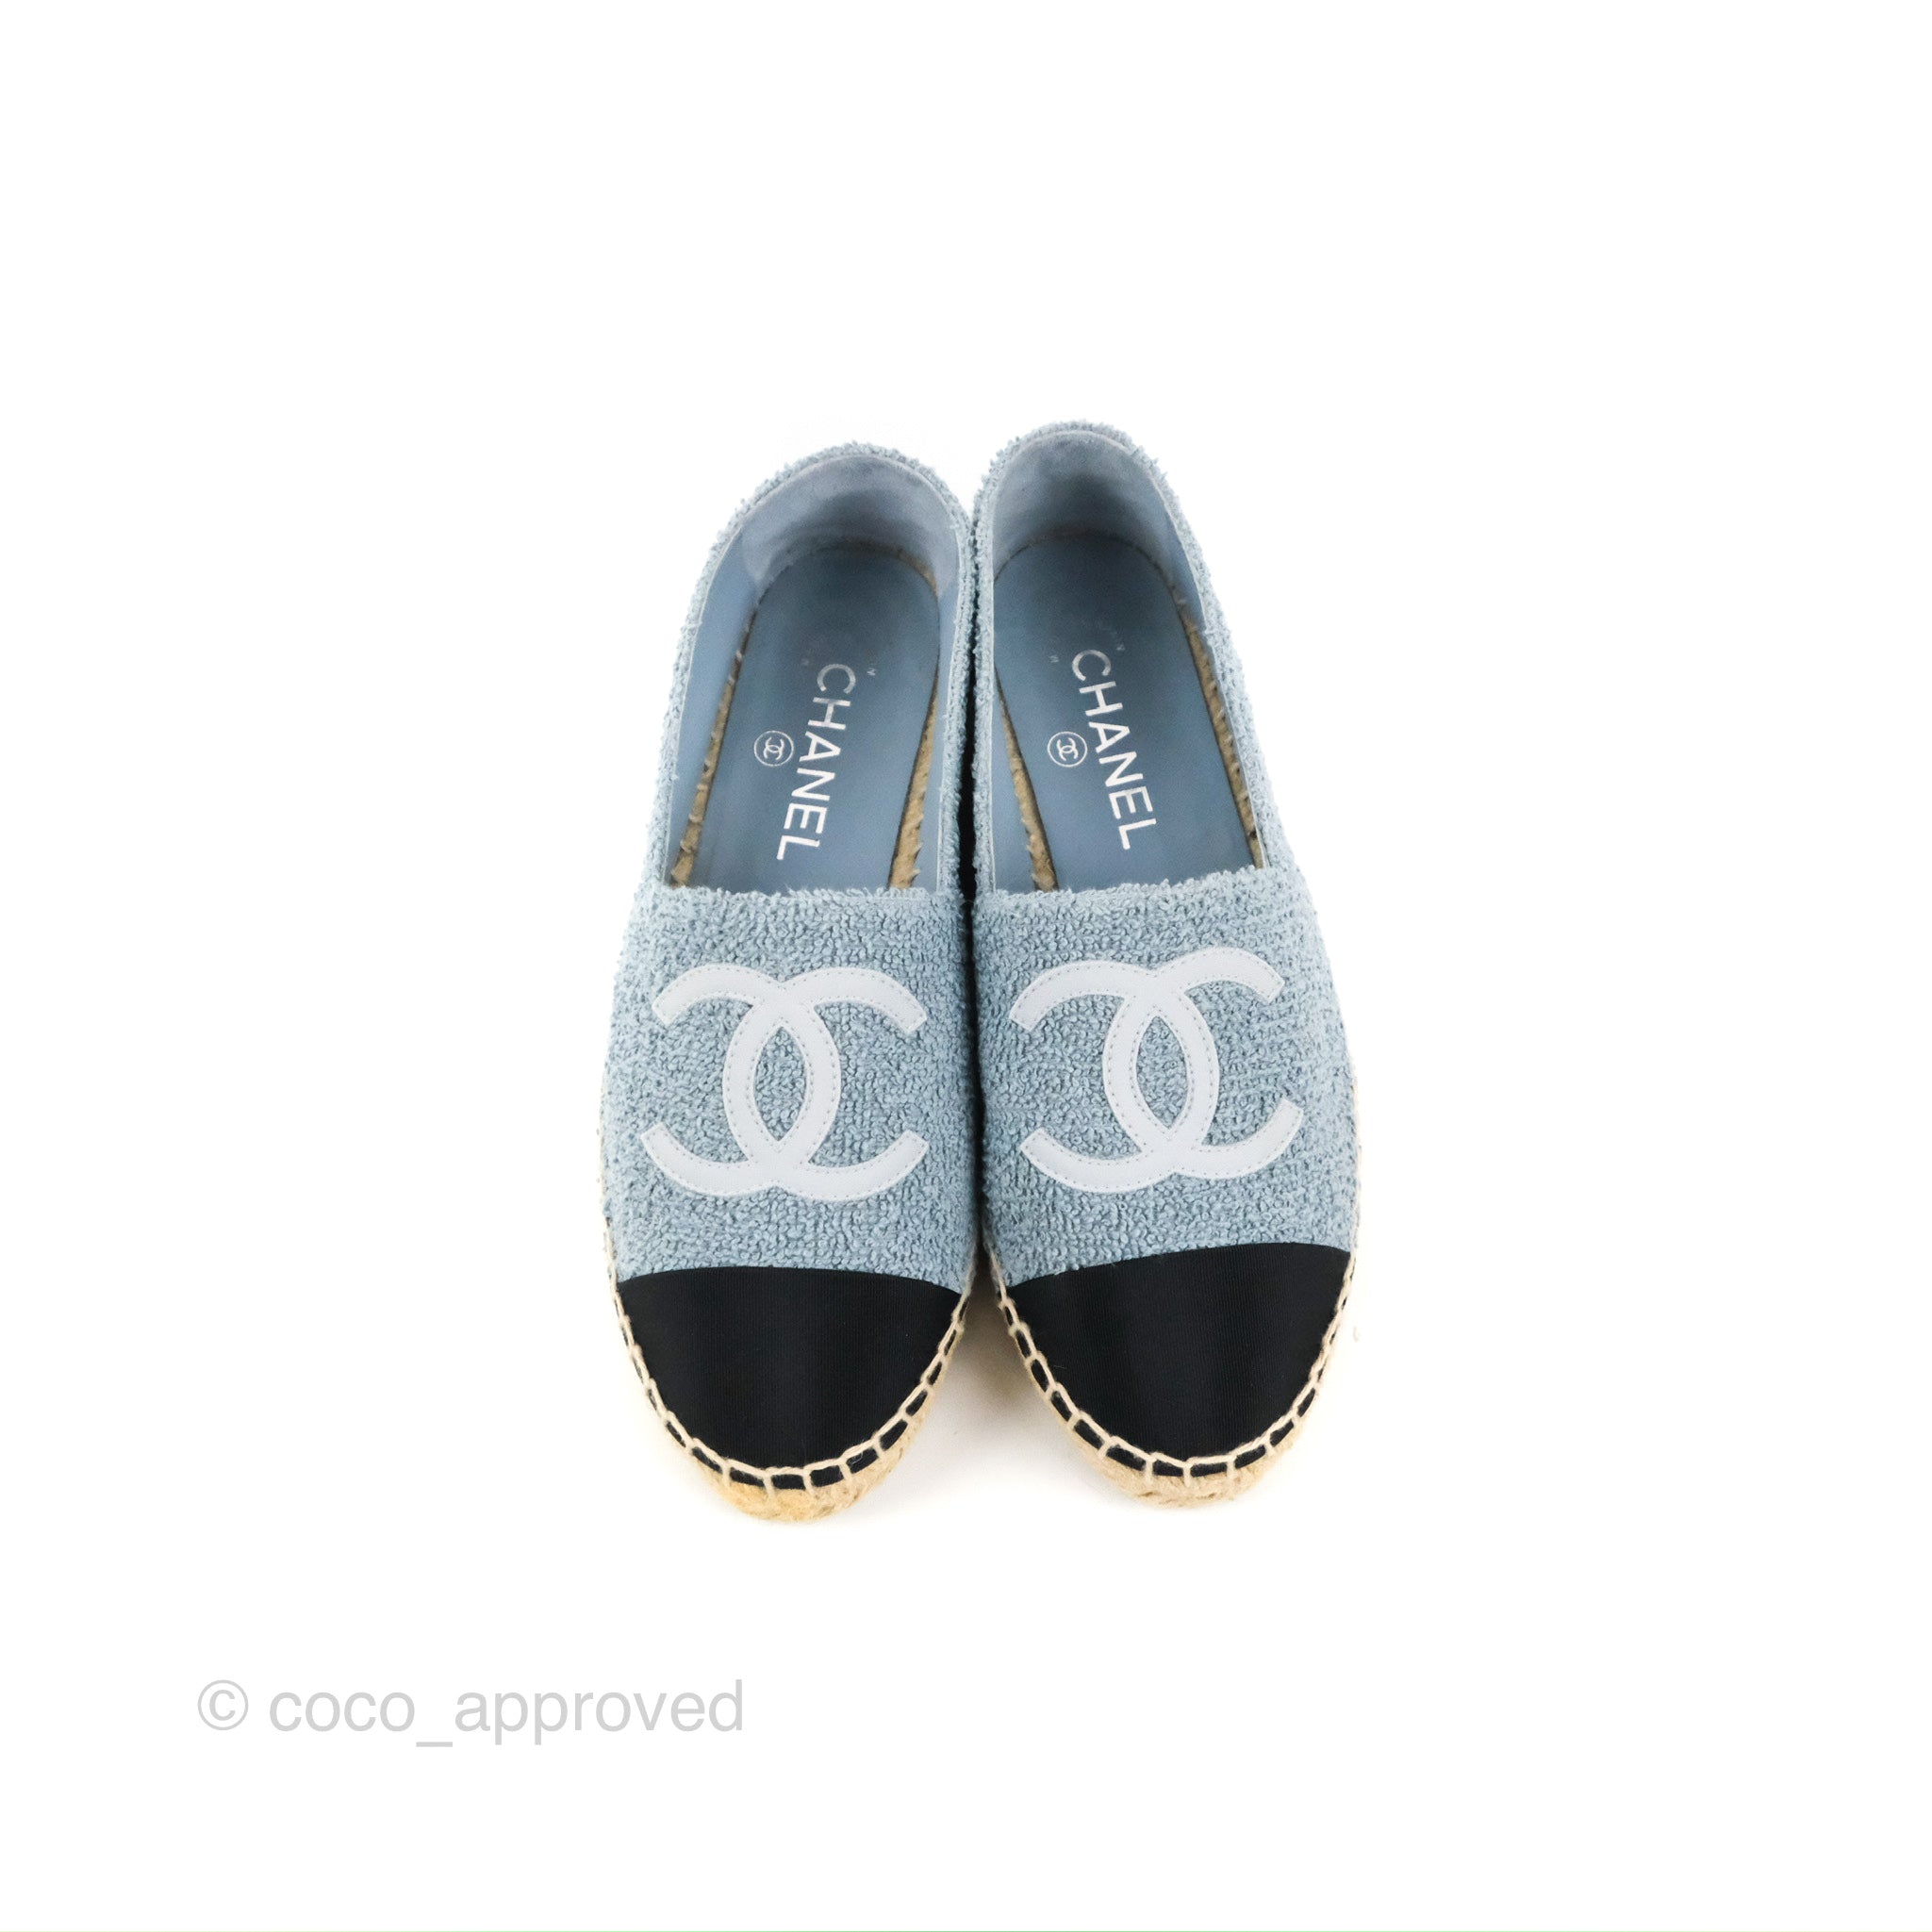 Chanel Espadrille Black Blue Tweed Size 37 – Coco Approved Studio